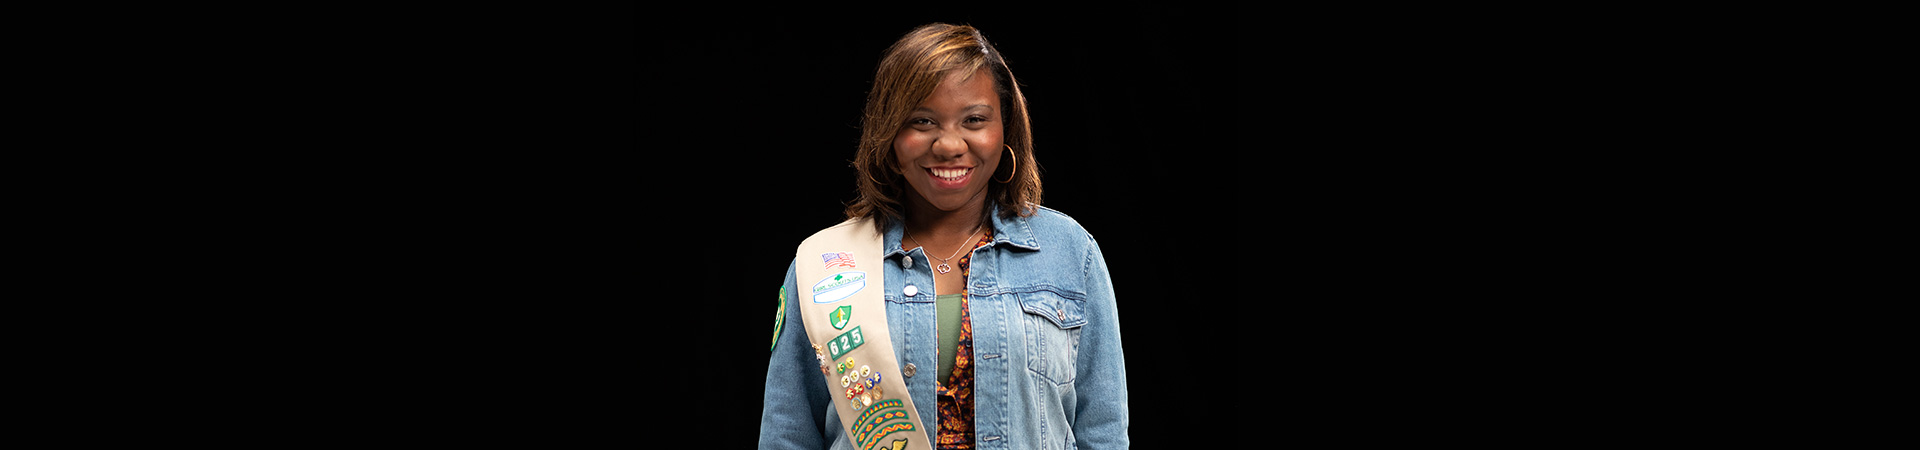  Gold Award Girl Scout in front of a black background 